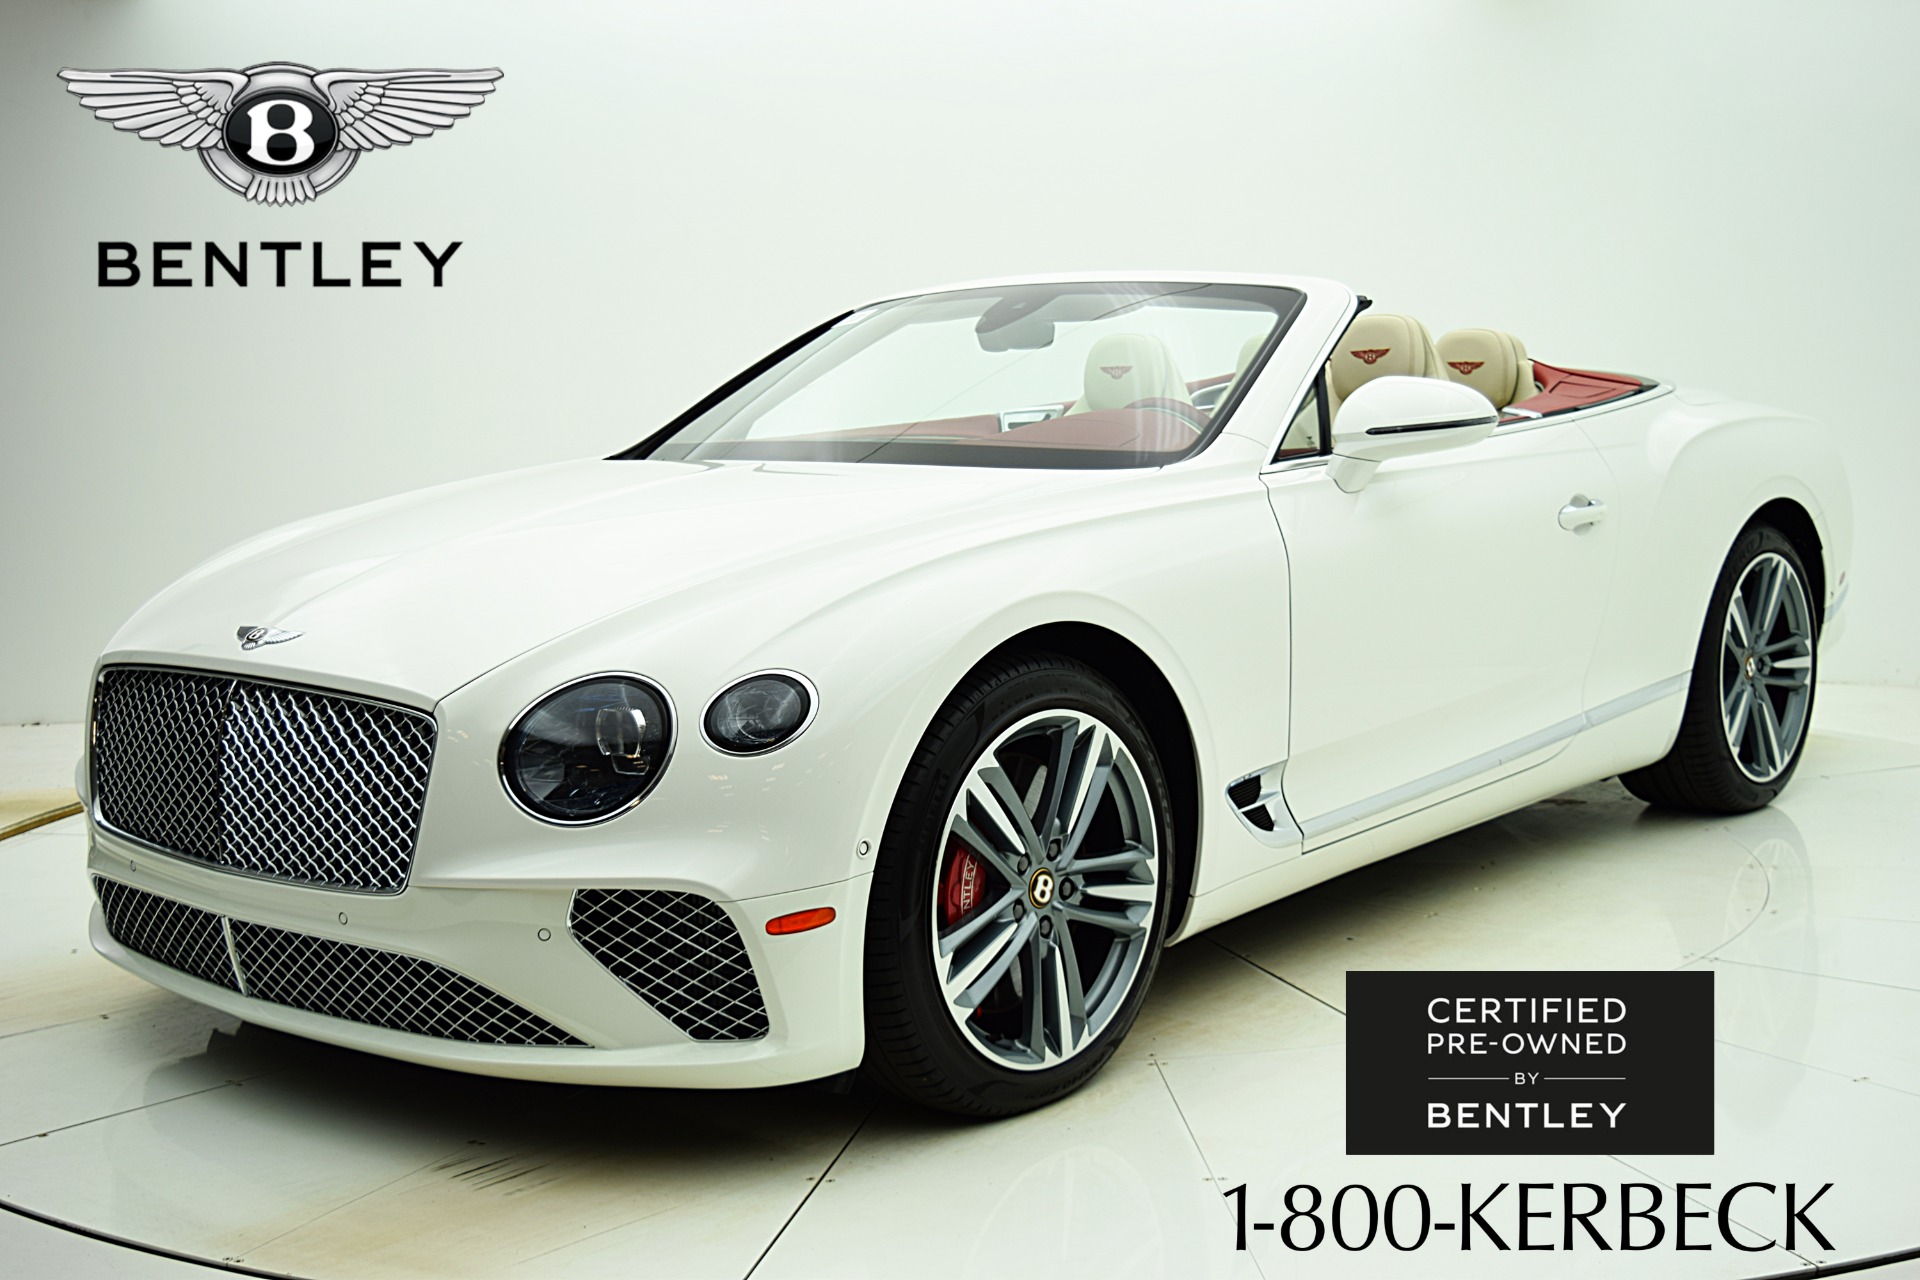 Used 2020 Bentley Continental GT V8 for sale $235,000 at Bentley Palmyra N.J. in Palmyra NJ 08065 2